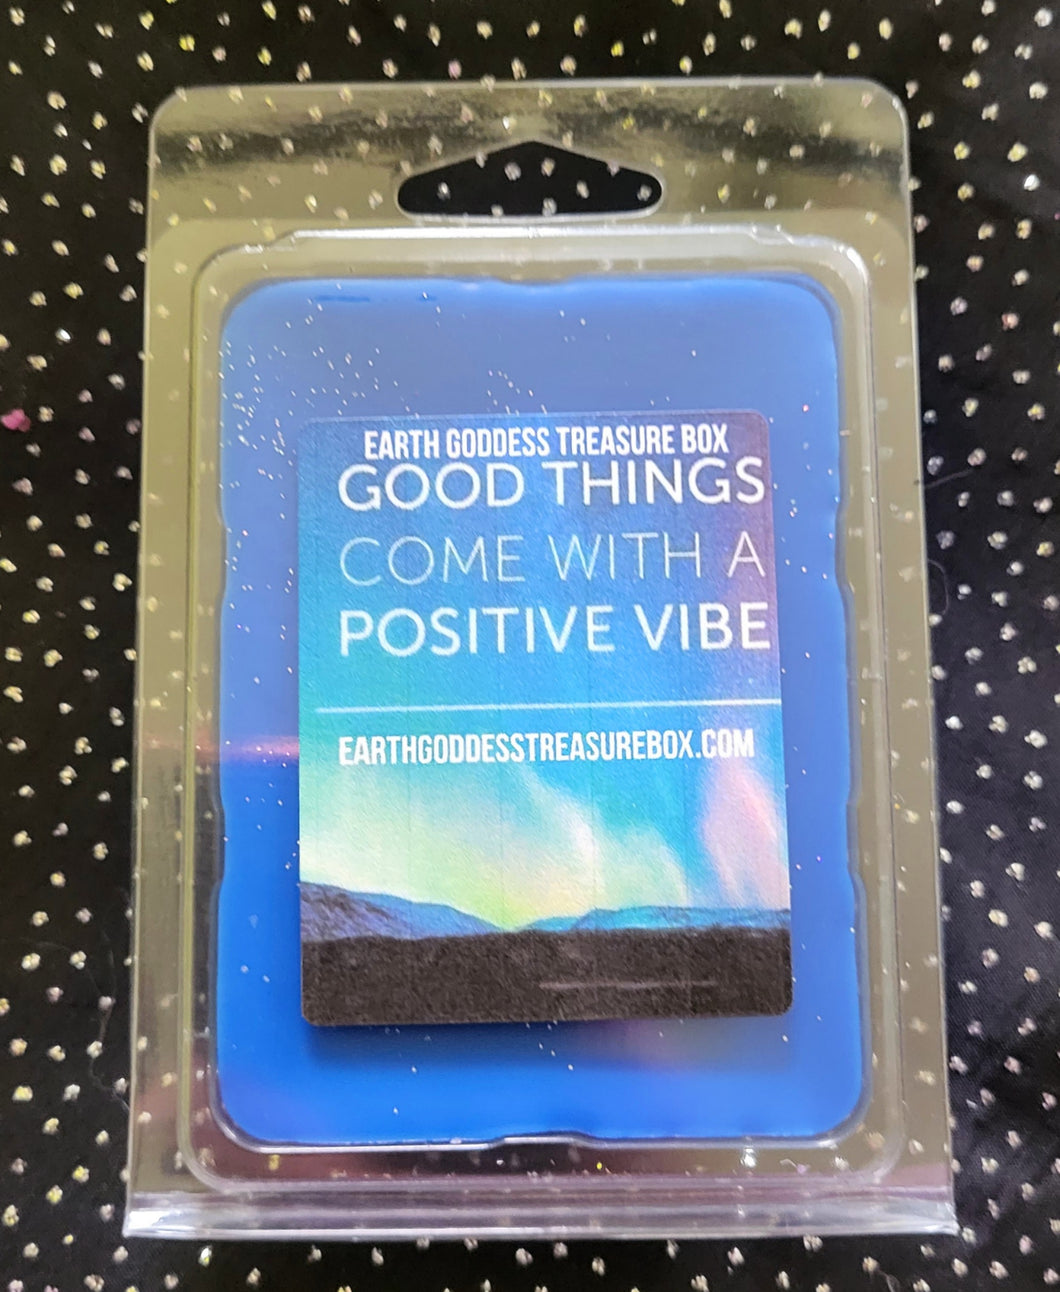 GOOD THINGS COME WITH A POSITIVE VIBE